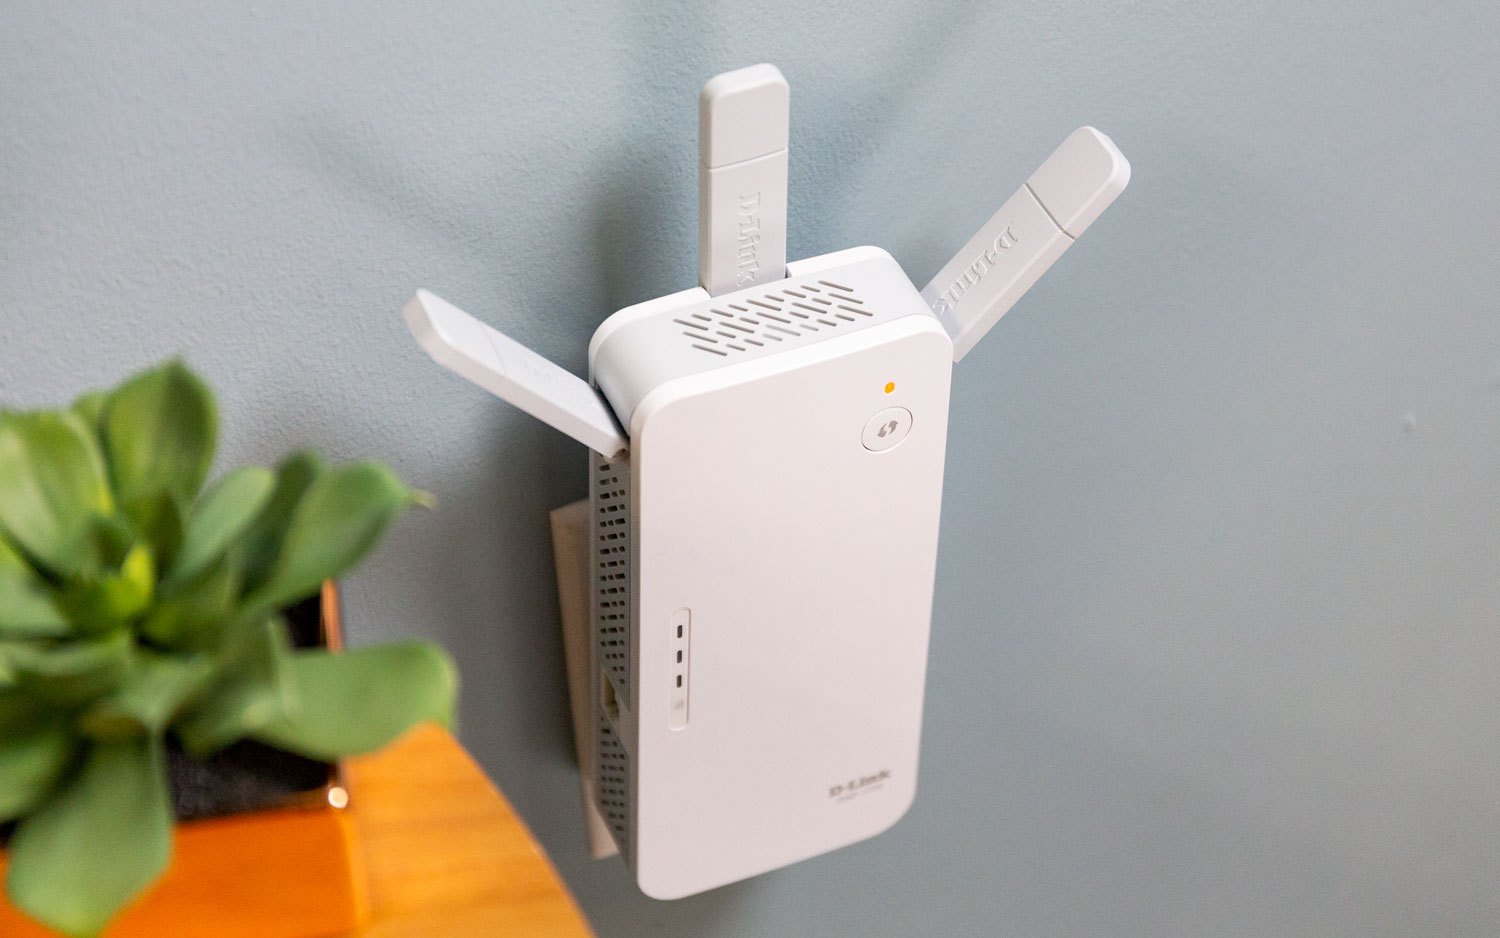 D-Link DAP-1720 Wi-Fi Range Extender – Full Review and Benchmarks | Tom's Guide